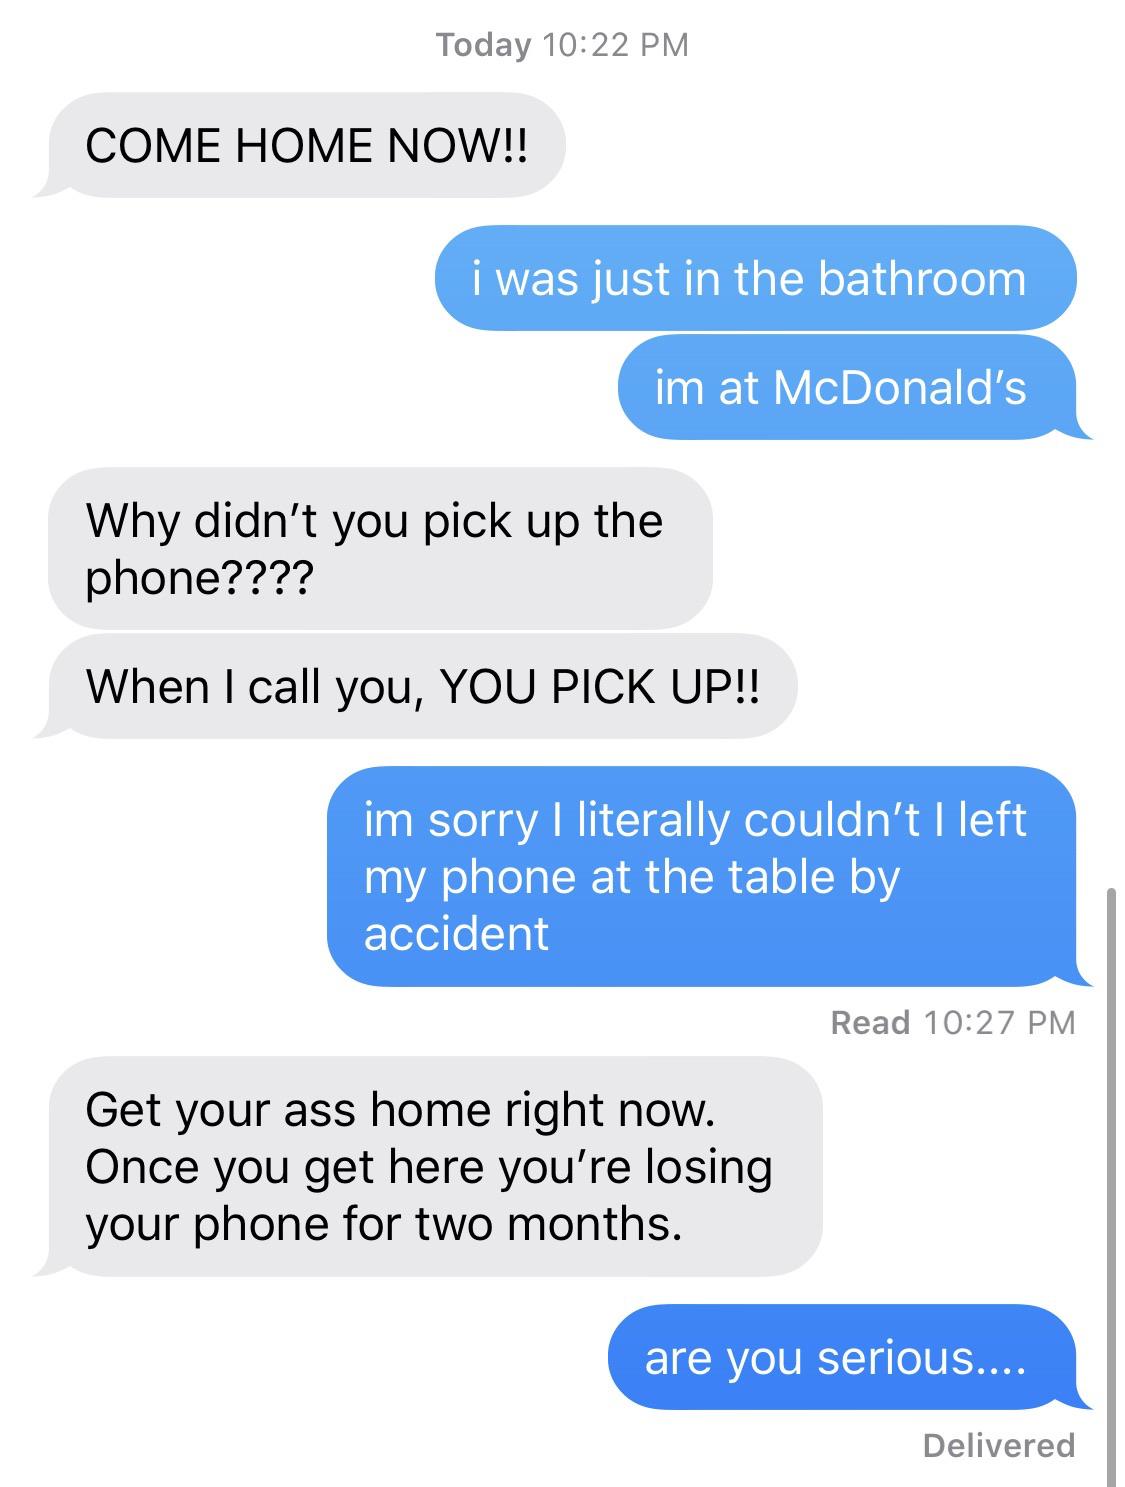 organization - Today Come Home Now!! i was just in the bathroom im at McDonald's Why didn't you pick up the phone???? When I call you, You Pick Up!! im sorry I literally couldn't I left my phone at the table by accident Read Get your ass home right now. O